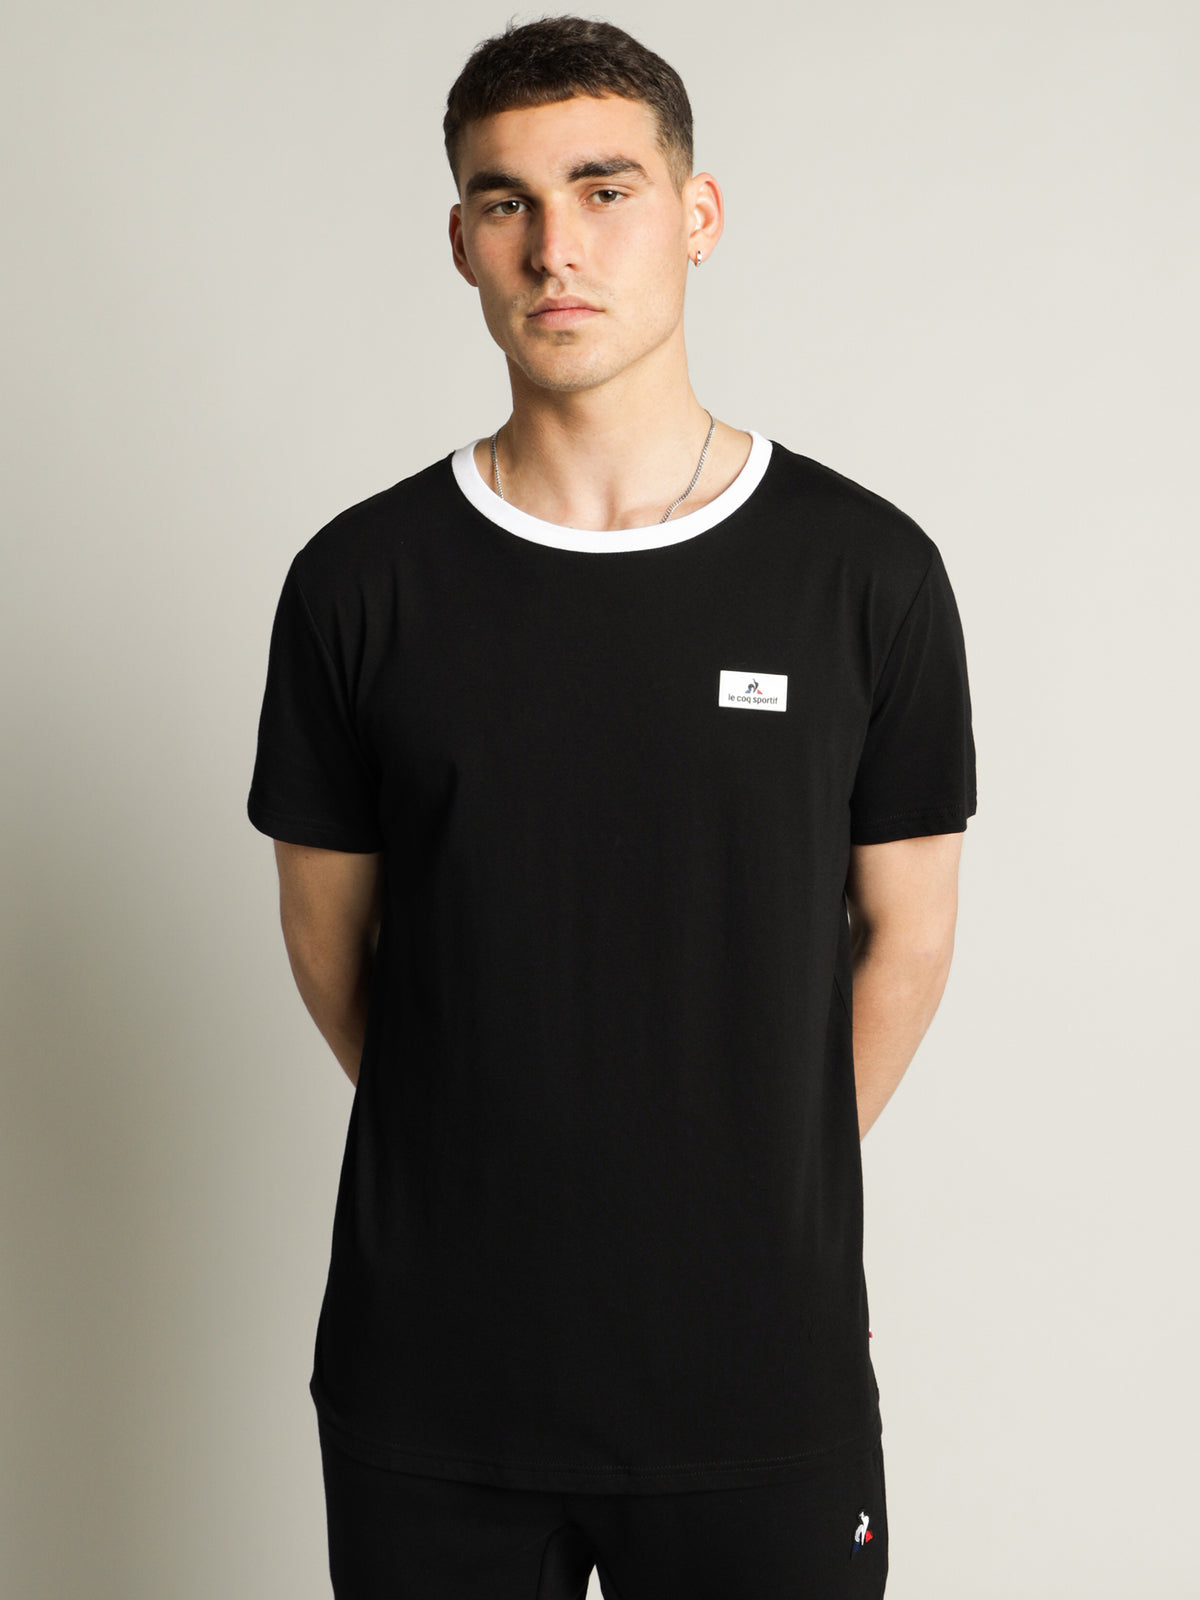 Musette T-Shirt in Black